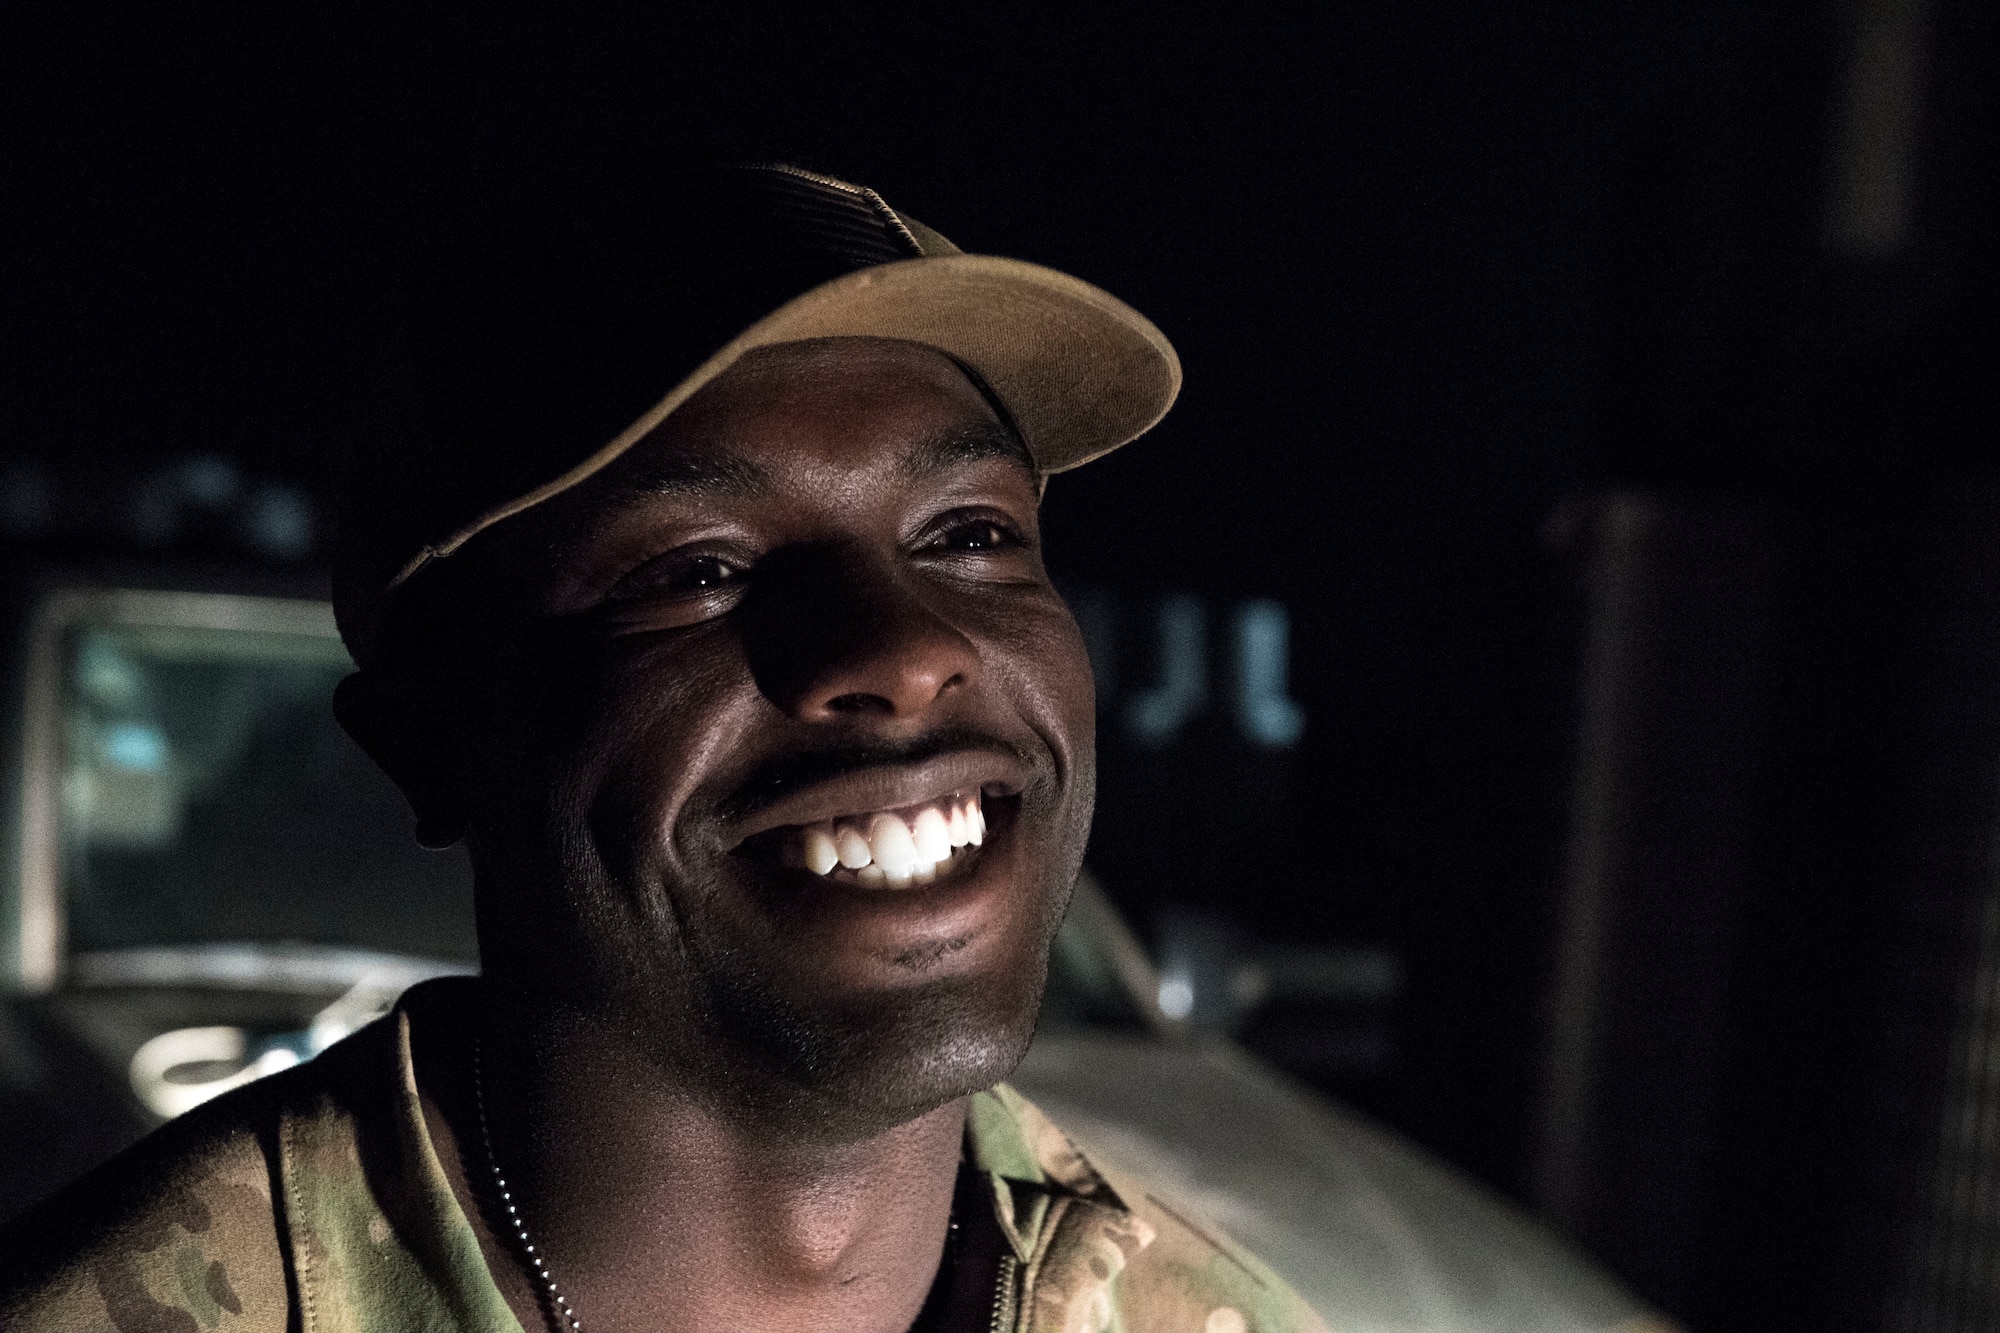 U.S. Air Force Staff Sgt. Mackenzie Isidor, 822nd Expeditionary Base Defense Squadron fire team leader, laughs during a night-shift conversation with one of cowrkers, Feb. 26, 2018, at Nigerien Air Base 201, in Agadez, Niger. Isidor inspires Airmen to consistently put in a conscientious effort to seek opportunities to succeed in the military. (U.S. Air Force photo by Tech. Sgt. Nick Wilson)